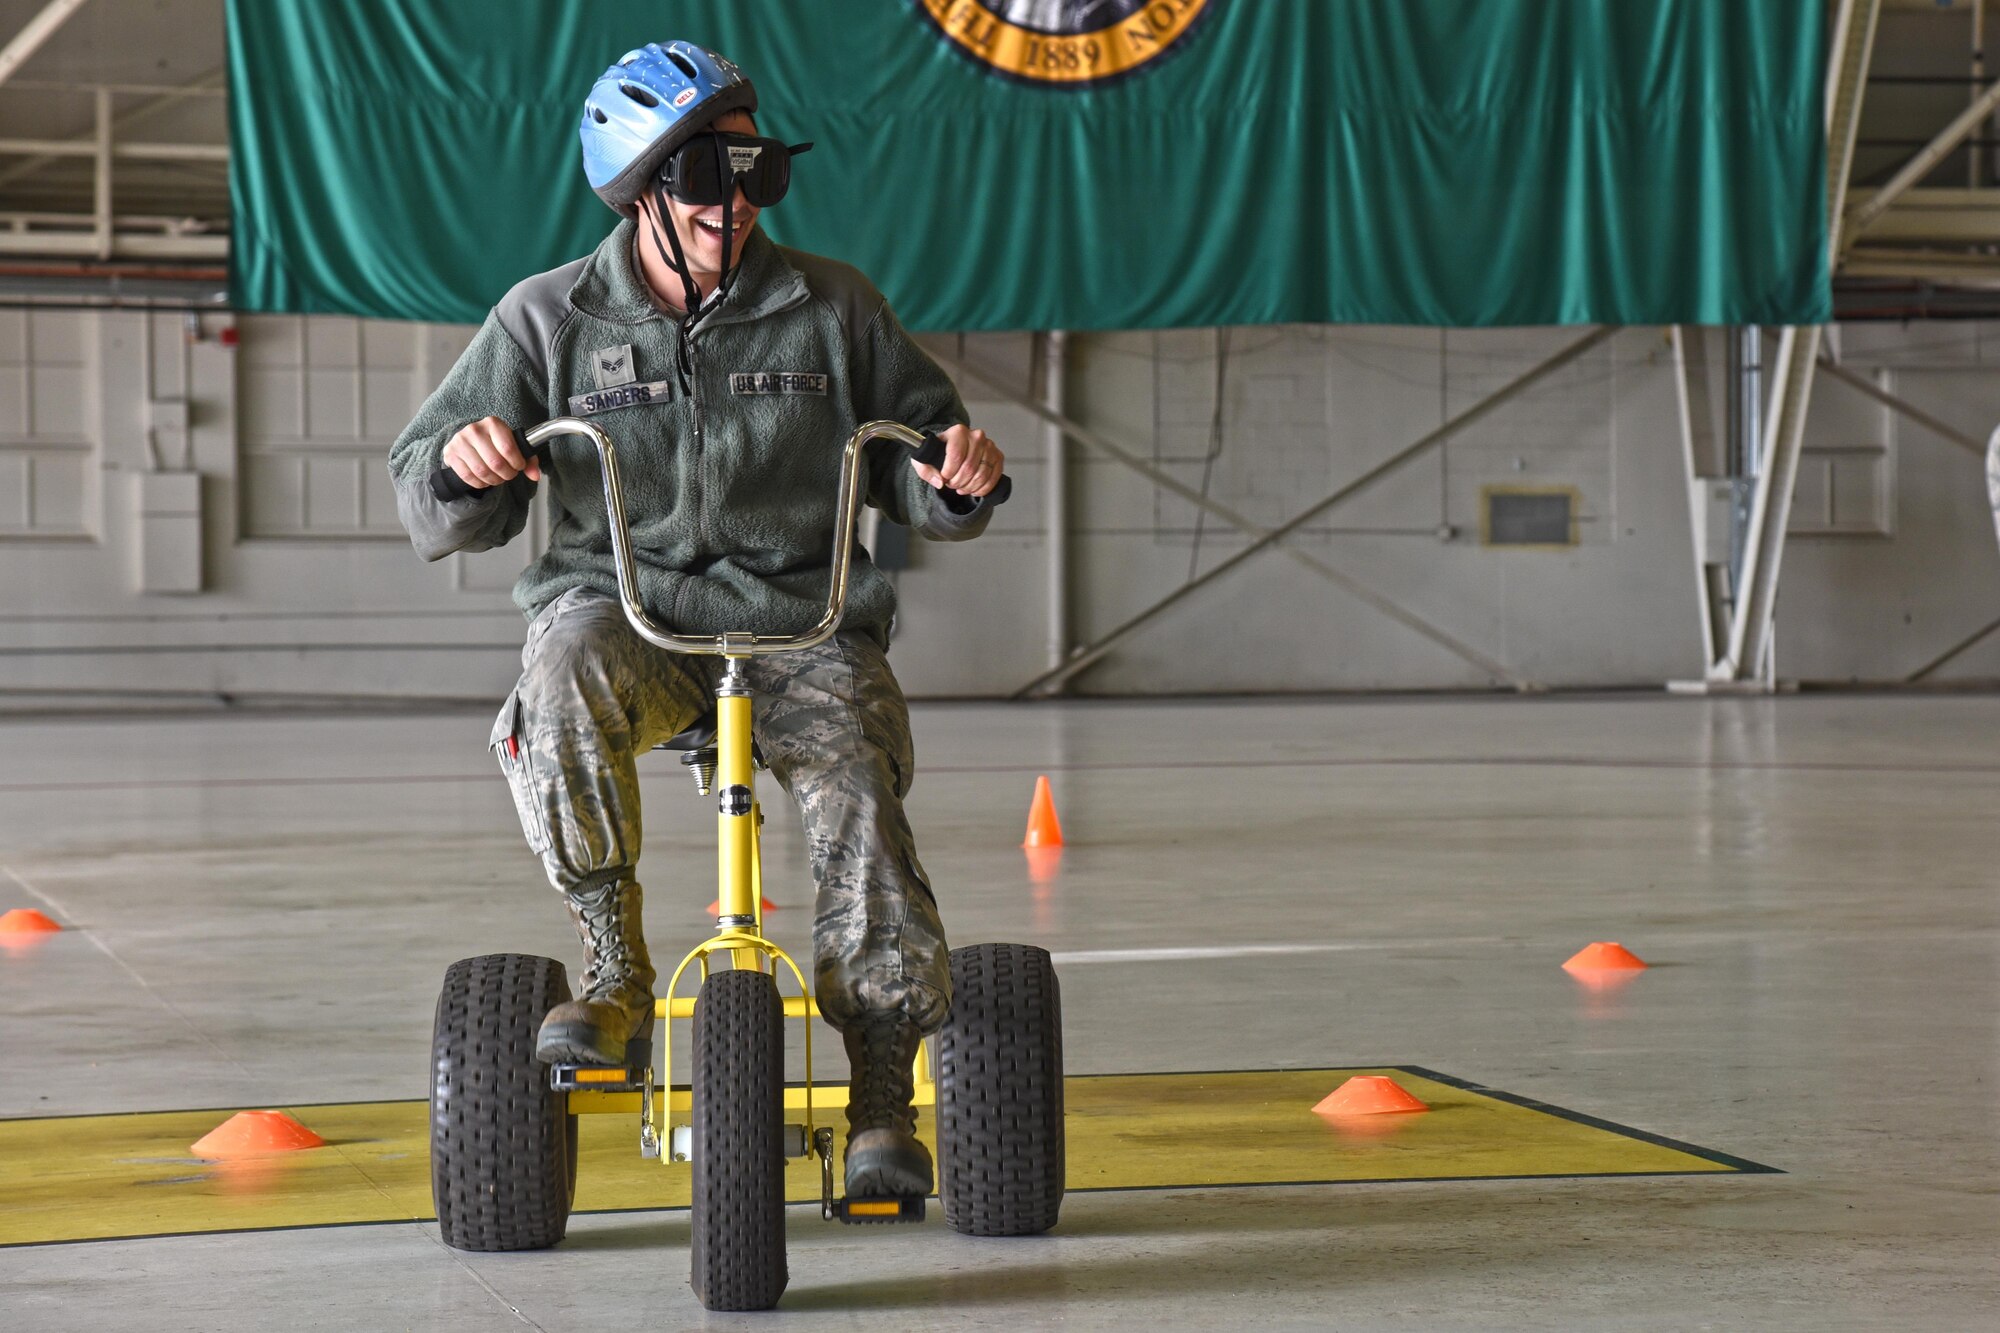 Senior Airman Edwin Sanders, 92nd Aircraft Maintenance Squadron aerospace propulsion journeyman, participates in the drunken tricycle obstacle course during the 92nd and 141st Maintenance Group Fall Olympics Nov. 15, 2016, at Fairchild Air Force Base. The obstacle course consisted of numerous gates and pathways to navigate through while wearing drunk goggles that simulated vision of having a blood alcohol content of double the legal limit. (U.S. Air Force photo/Senior Airman Mackenzie Richardson)